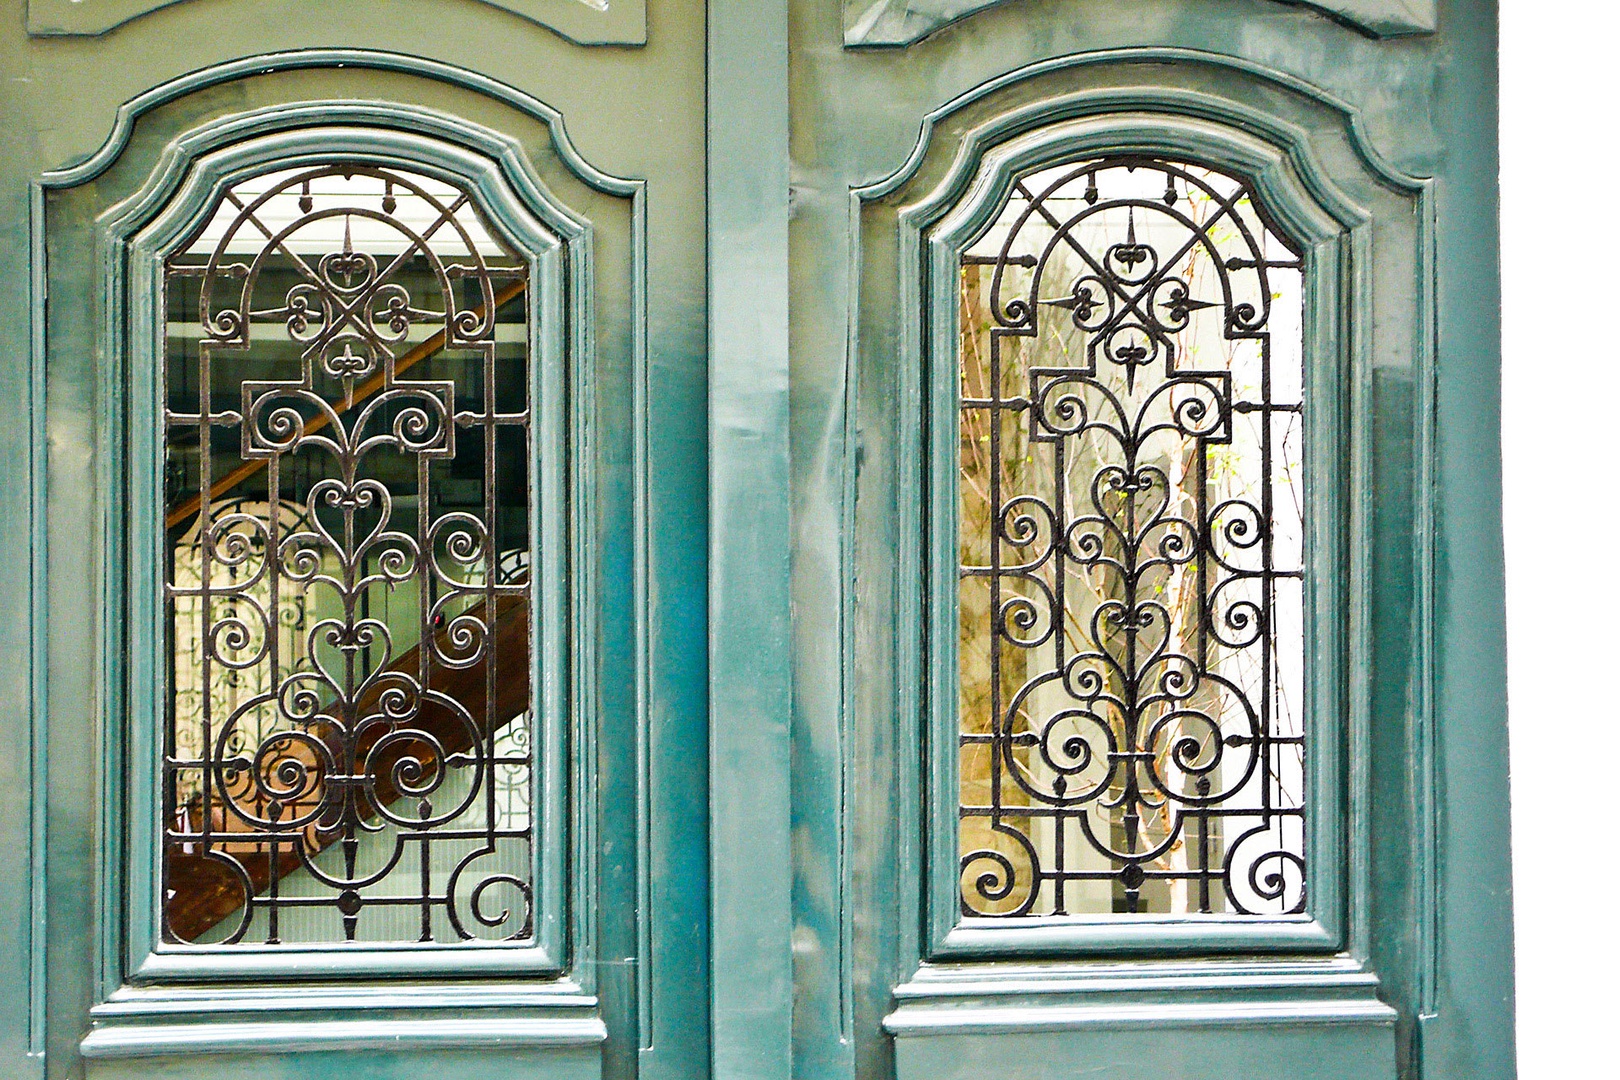 See the courtyard through the glass of these antique doors.